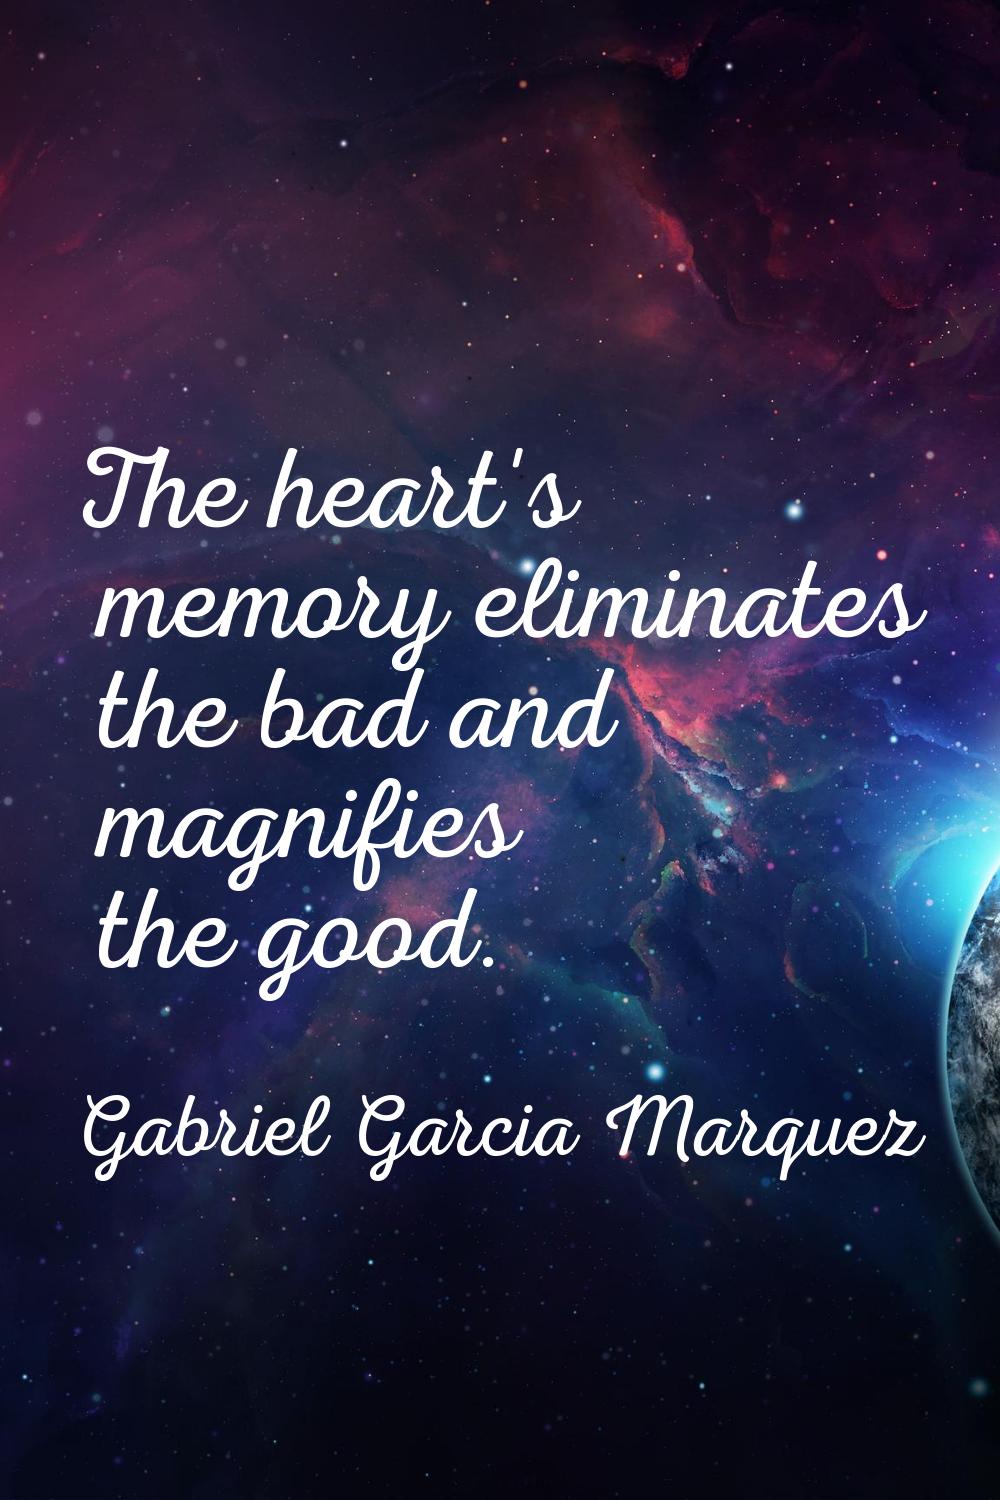 The heart's memory eliminates the bad and magnifies the good.